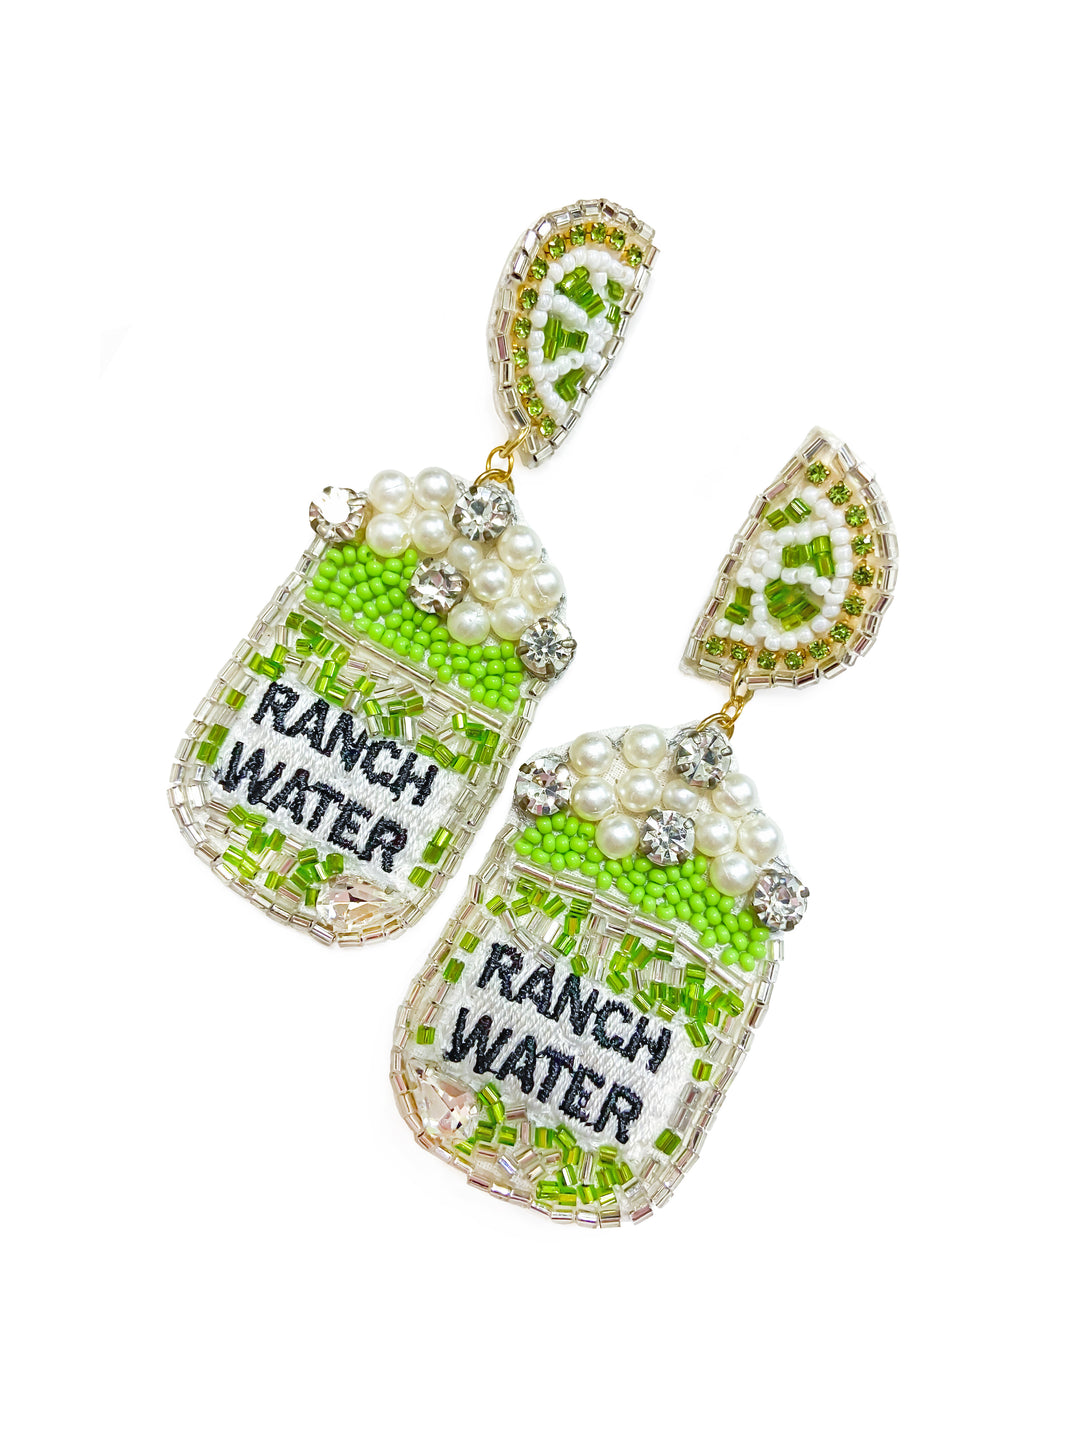 RANCH WATER CAN BEADED EARRING- LIME